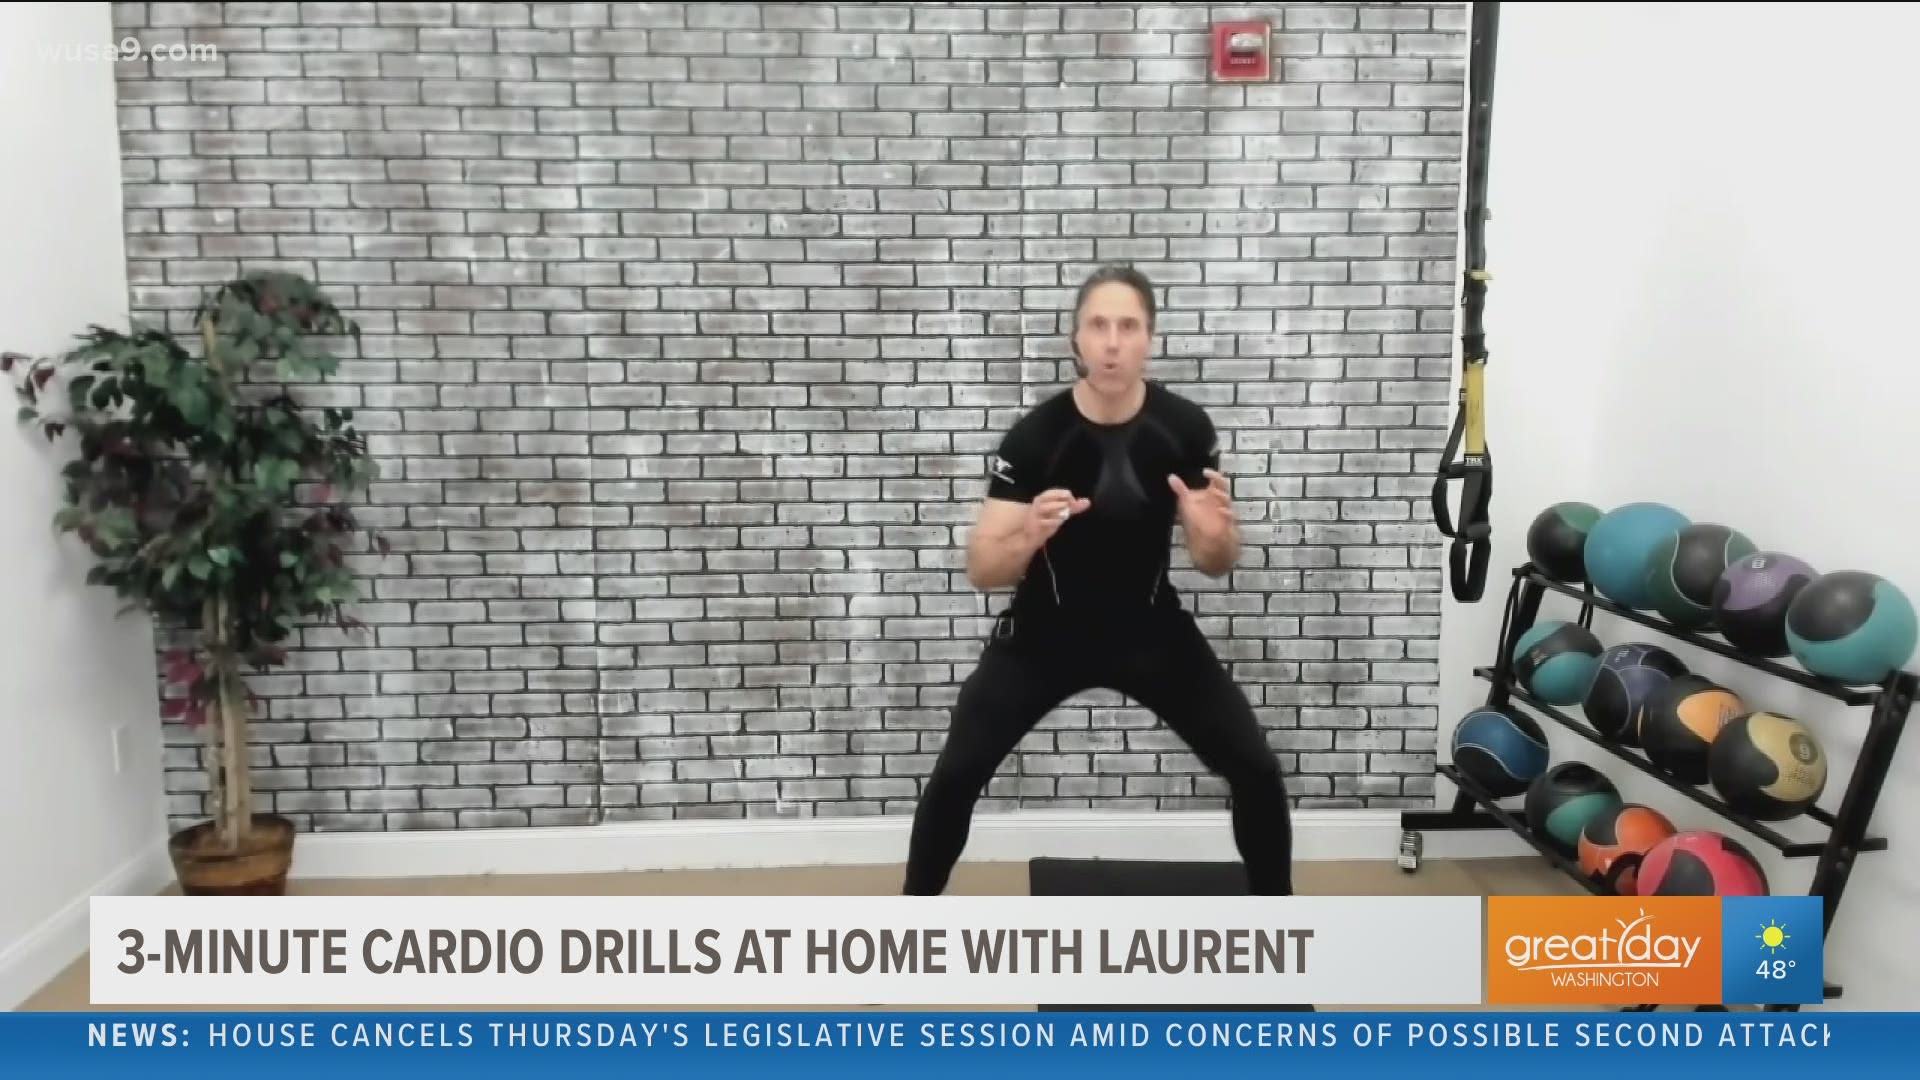 Fitness guru Laurent shares some tips to a quick and easy morning cardio routine.